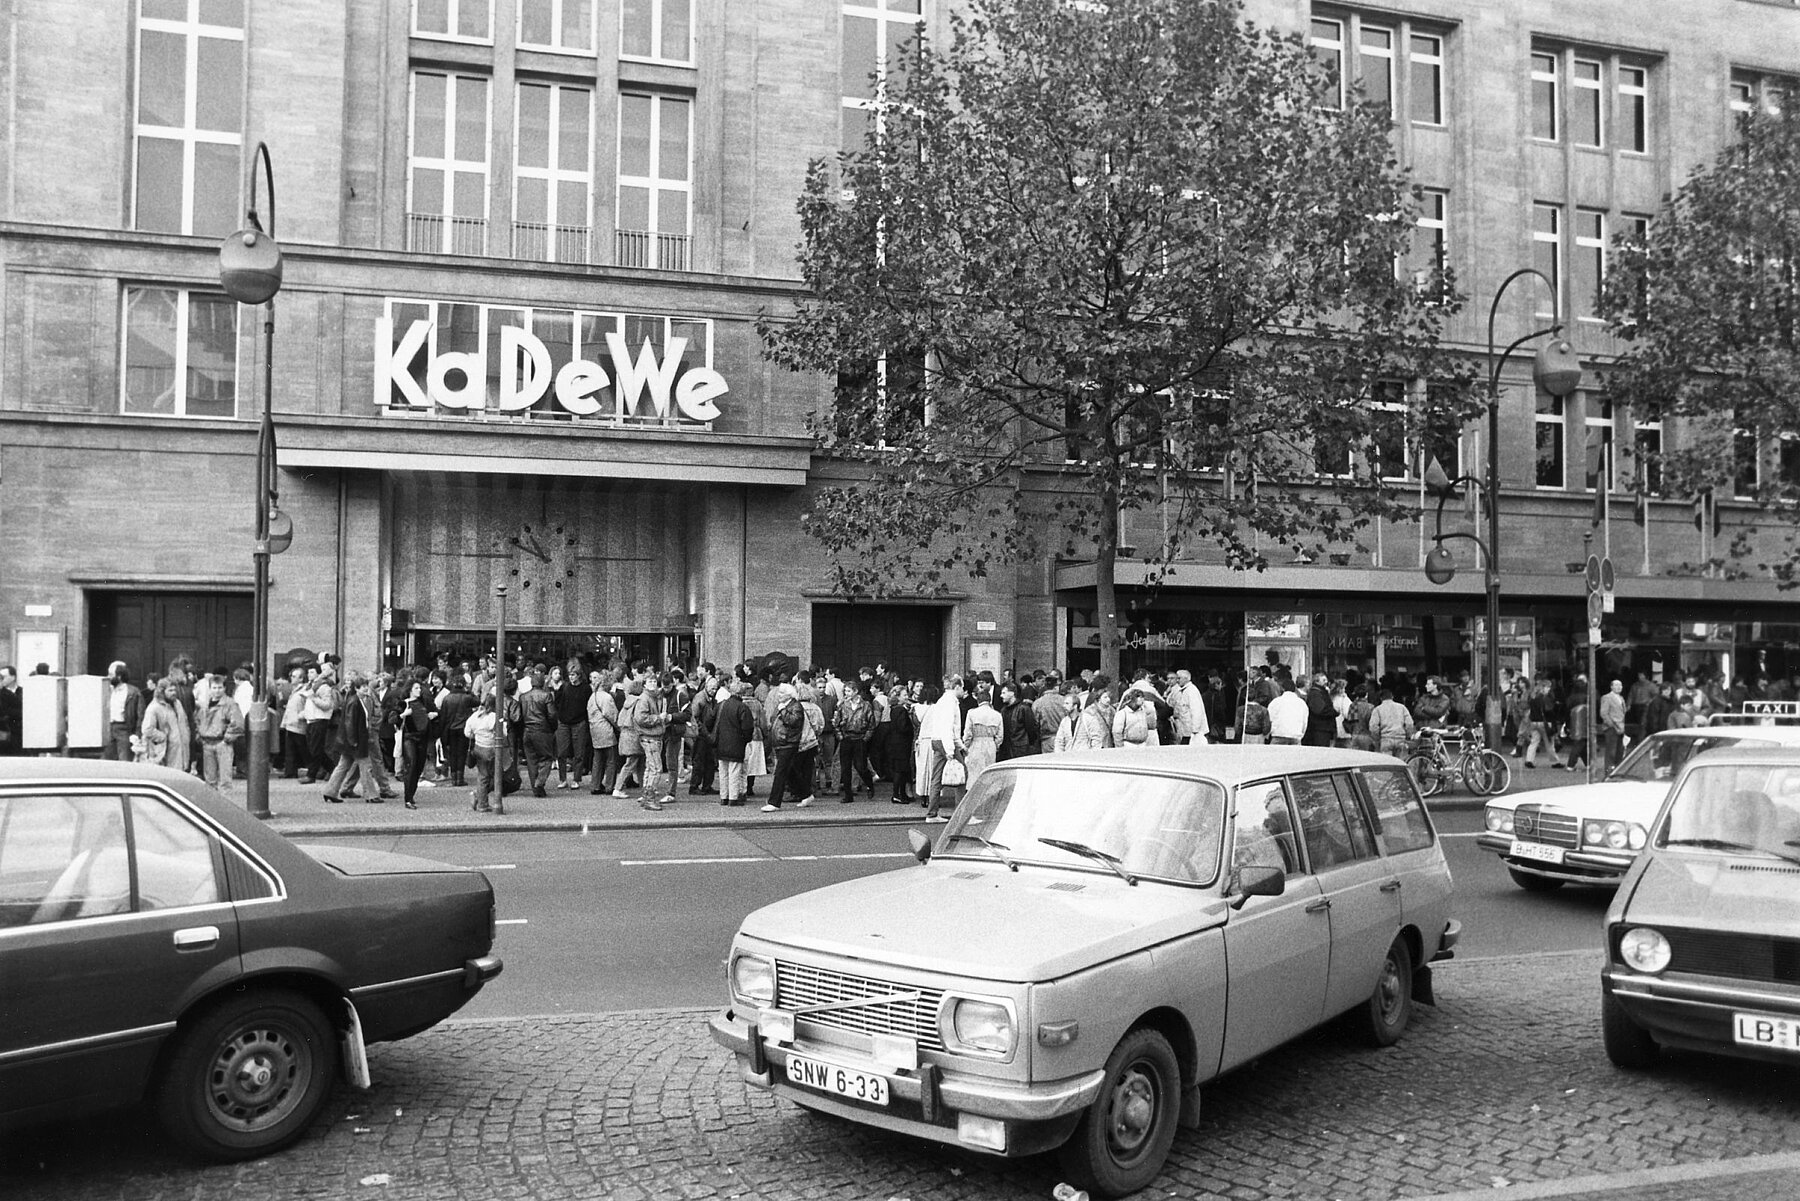 A long line of people in front of an entrance, above it the lettering KaDeWe. In the foreground is a street and parked cars. 